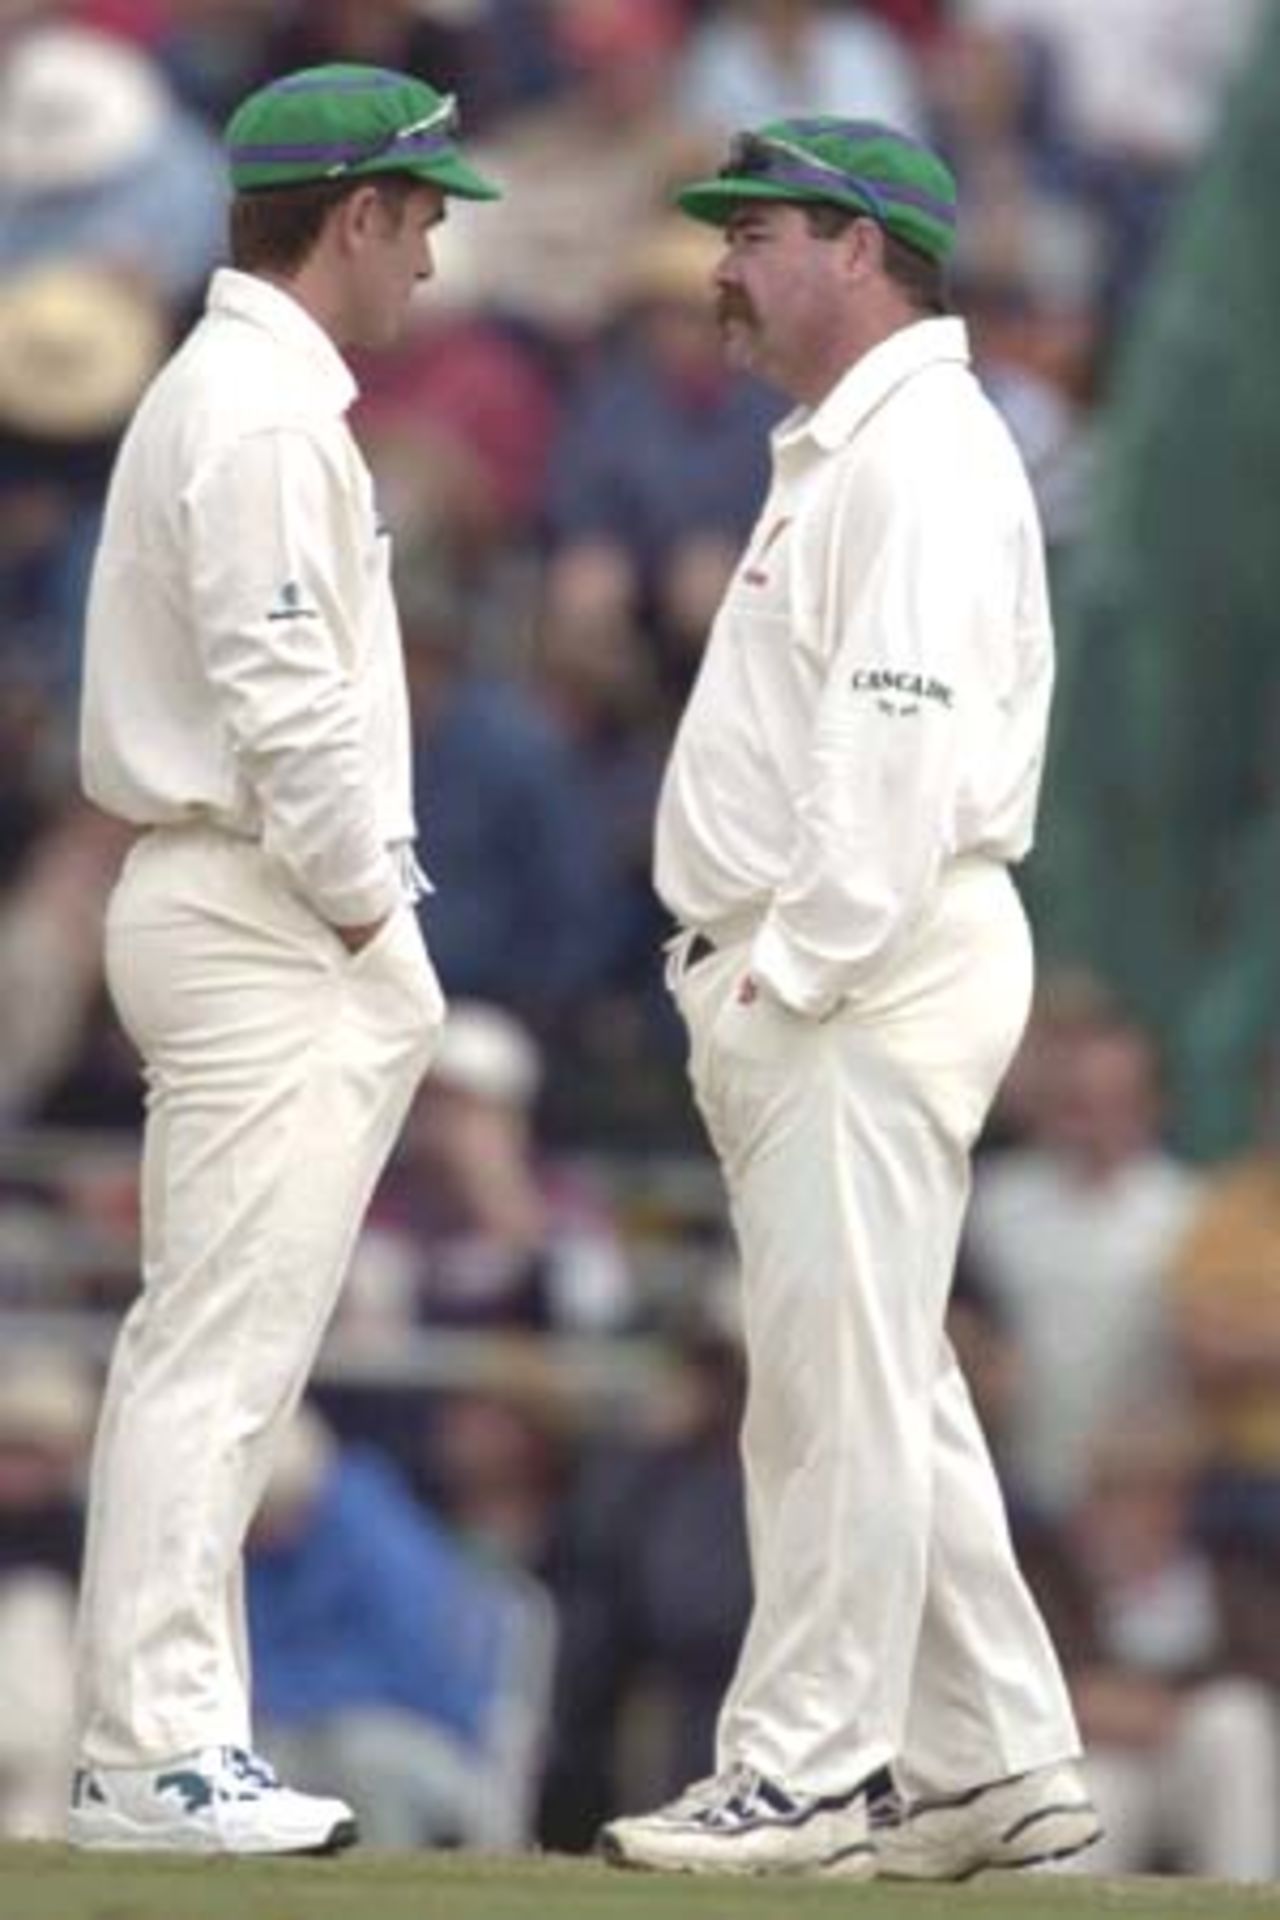 07 Nov 2000: Justin Langer and David Boon for the Chairman's XI in the match between the Australian Cricket Board's Chairman's XI and the West Indies at Lilac Hill in Perth, Australia.